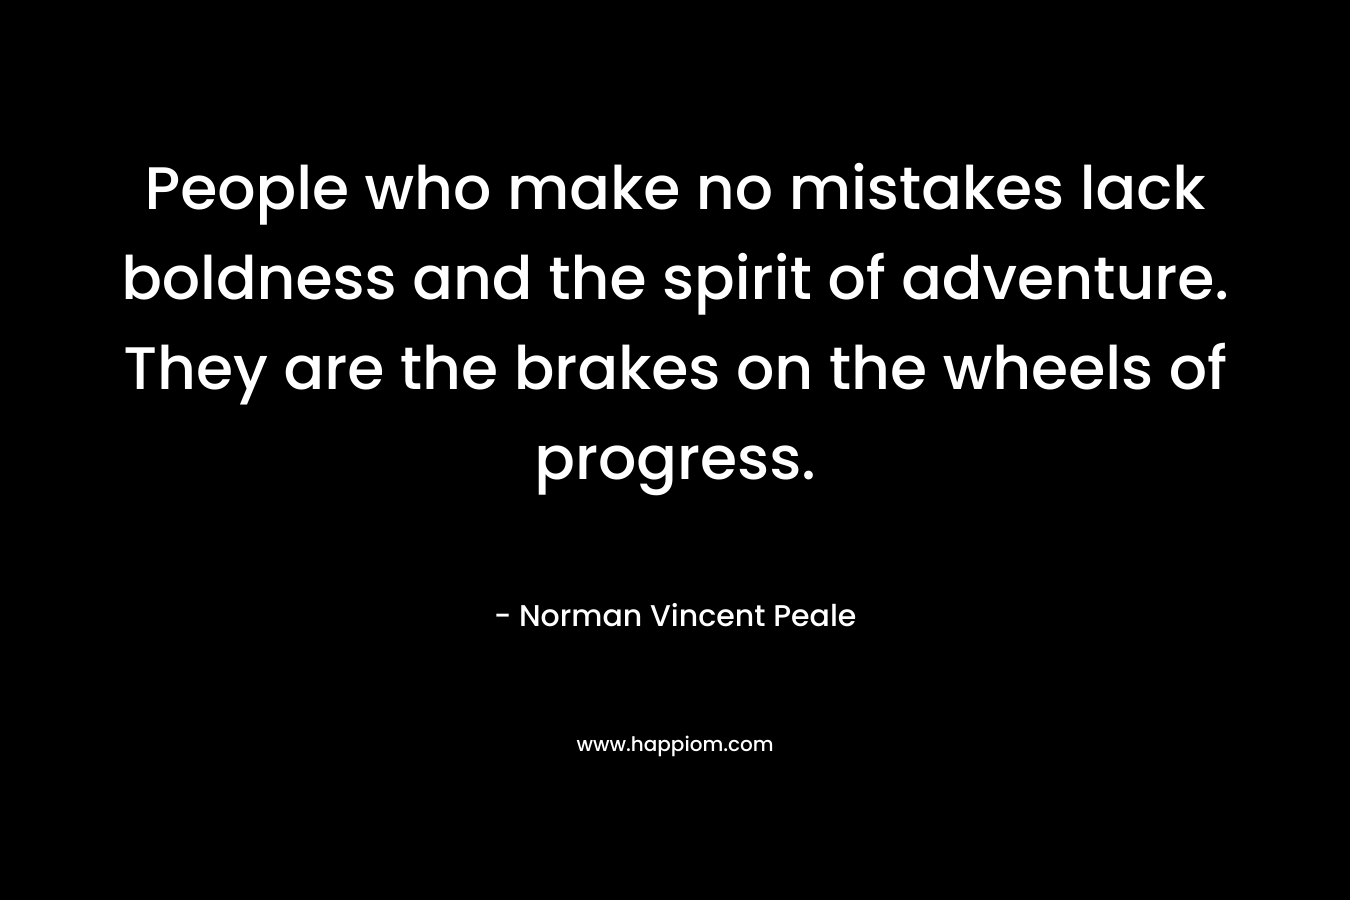 People who make no mistakes lack boldness and the spirit of adventure. They are the brakes on the wheels of progress. – Norman Vincent Peale